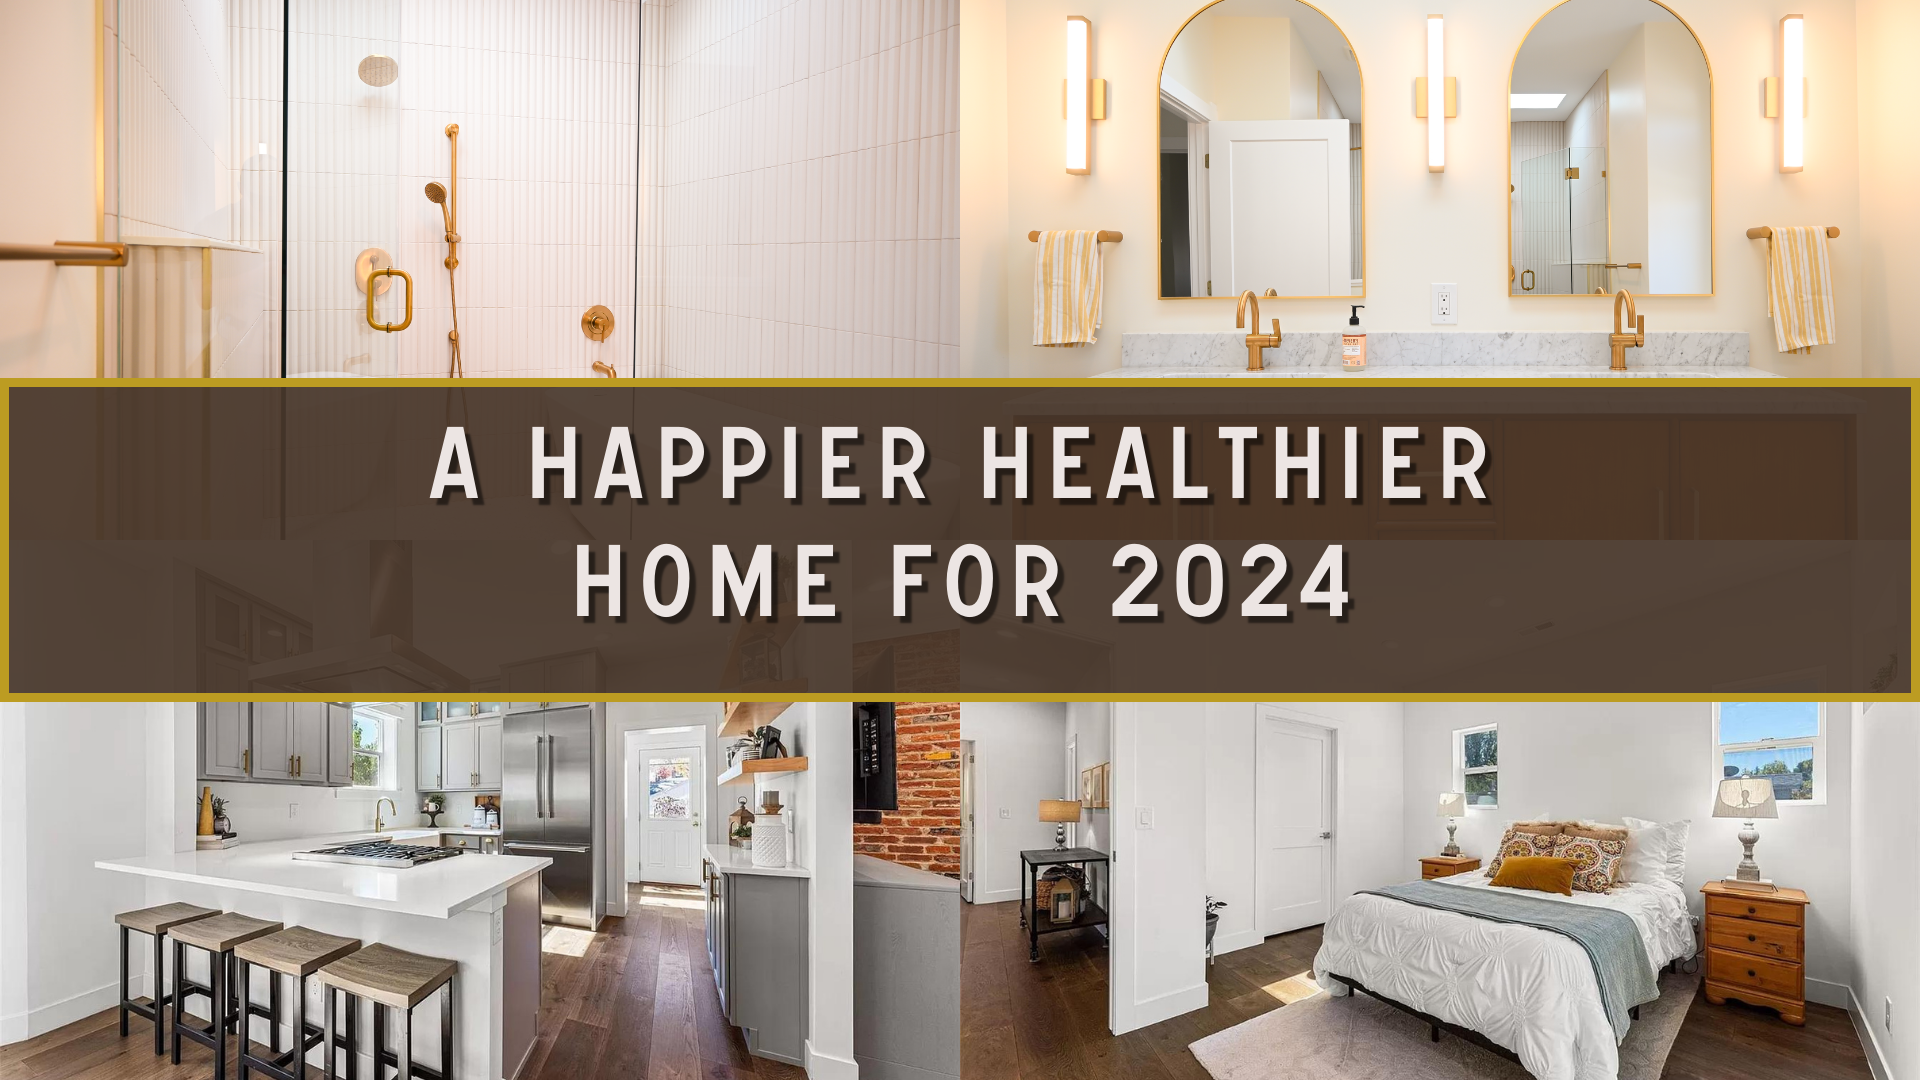 A happy healthier home for 2024 sustainable design build general contractor home remodeling company denver home